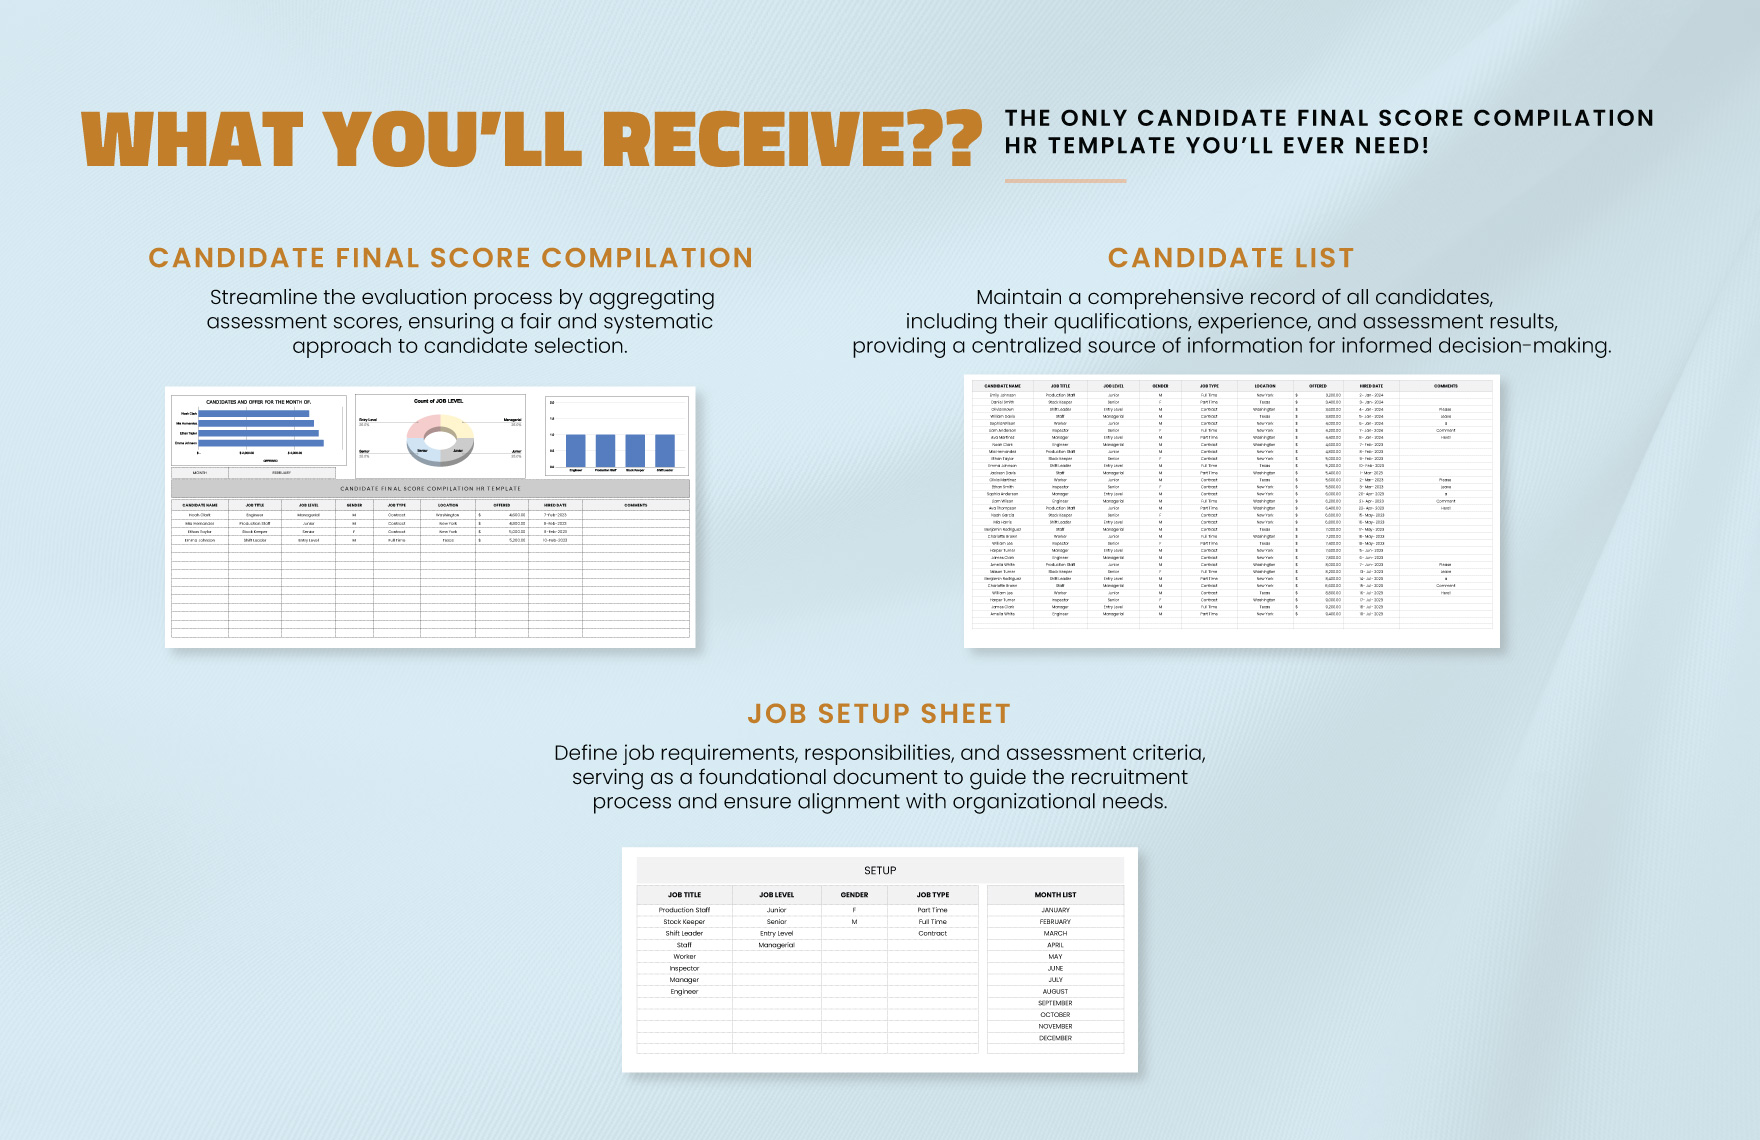 Candidate Final Score Compilation HR Template